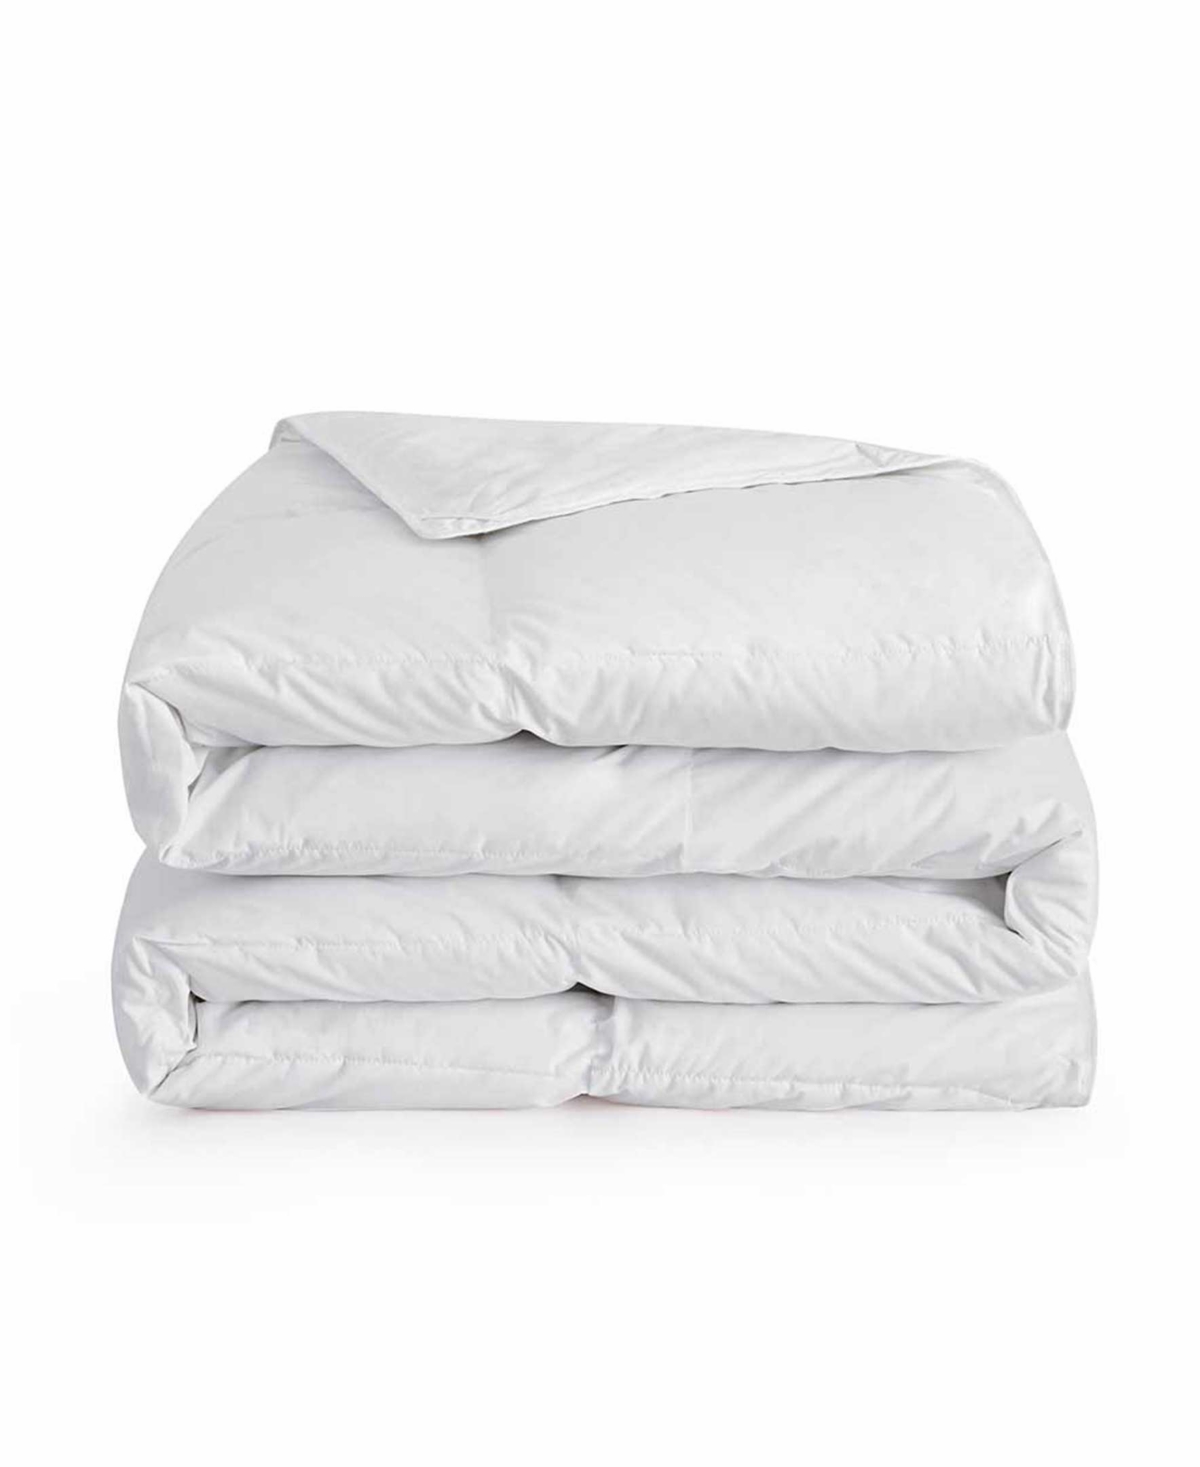 Unikome Cotton Fabric Lightweight Goose Feather Down Comforter, Full/queen In White